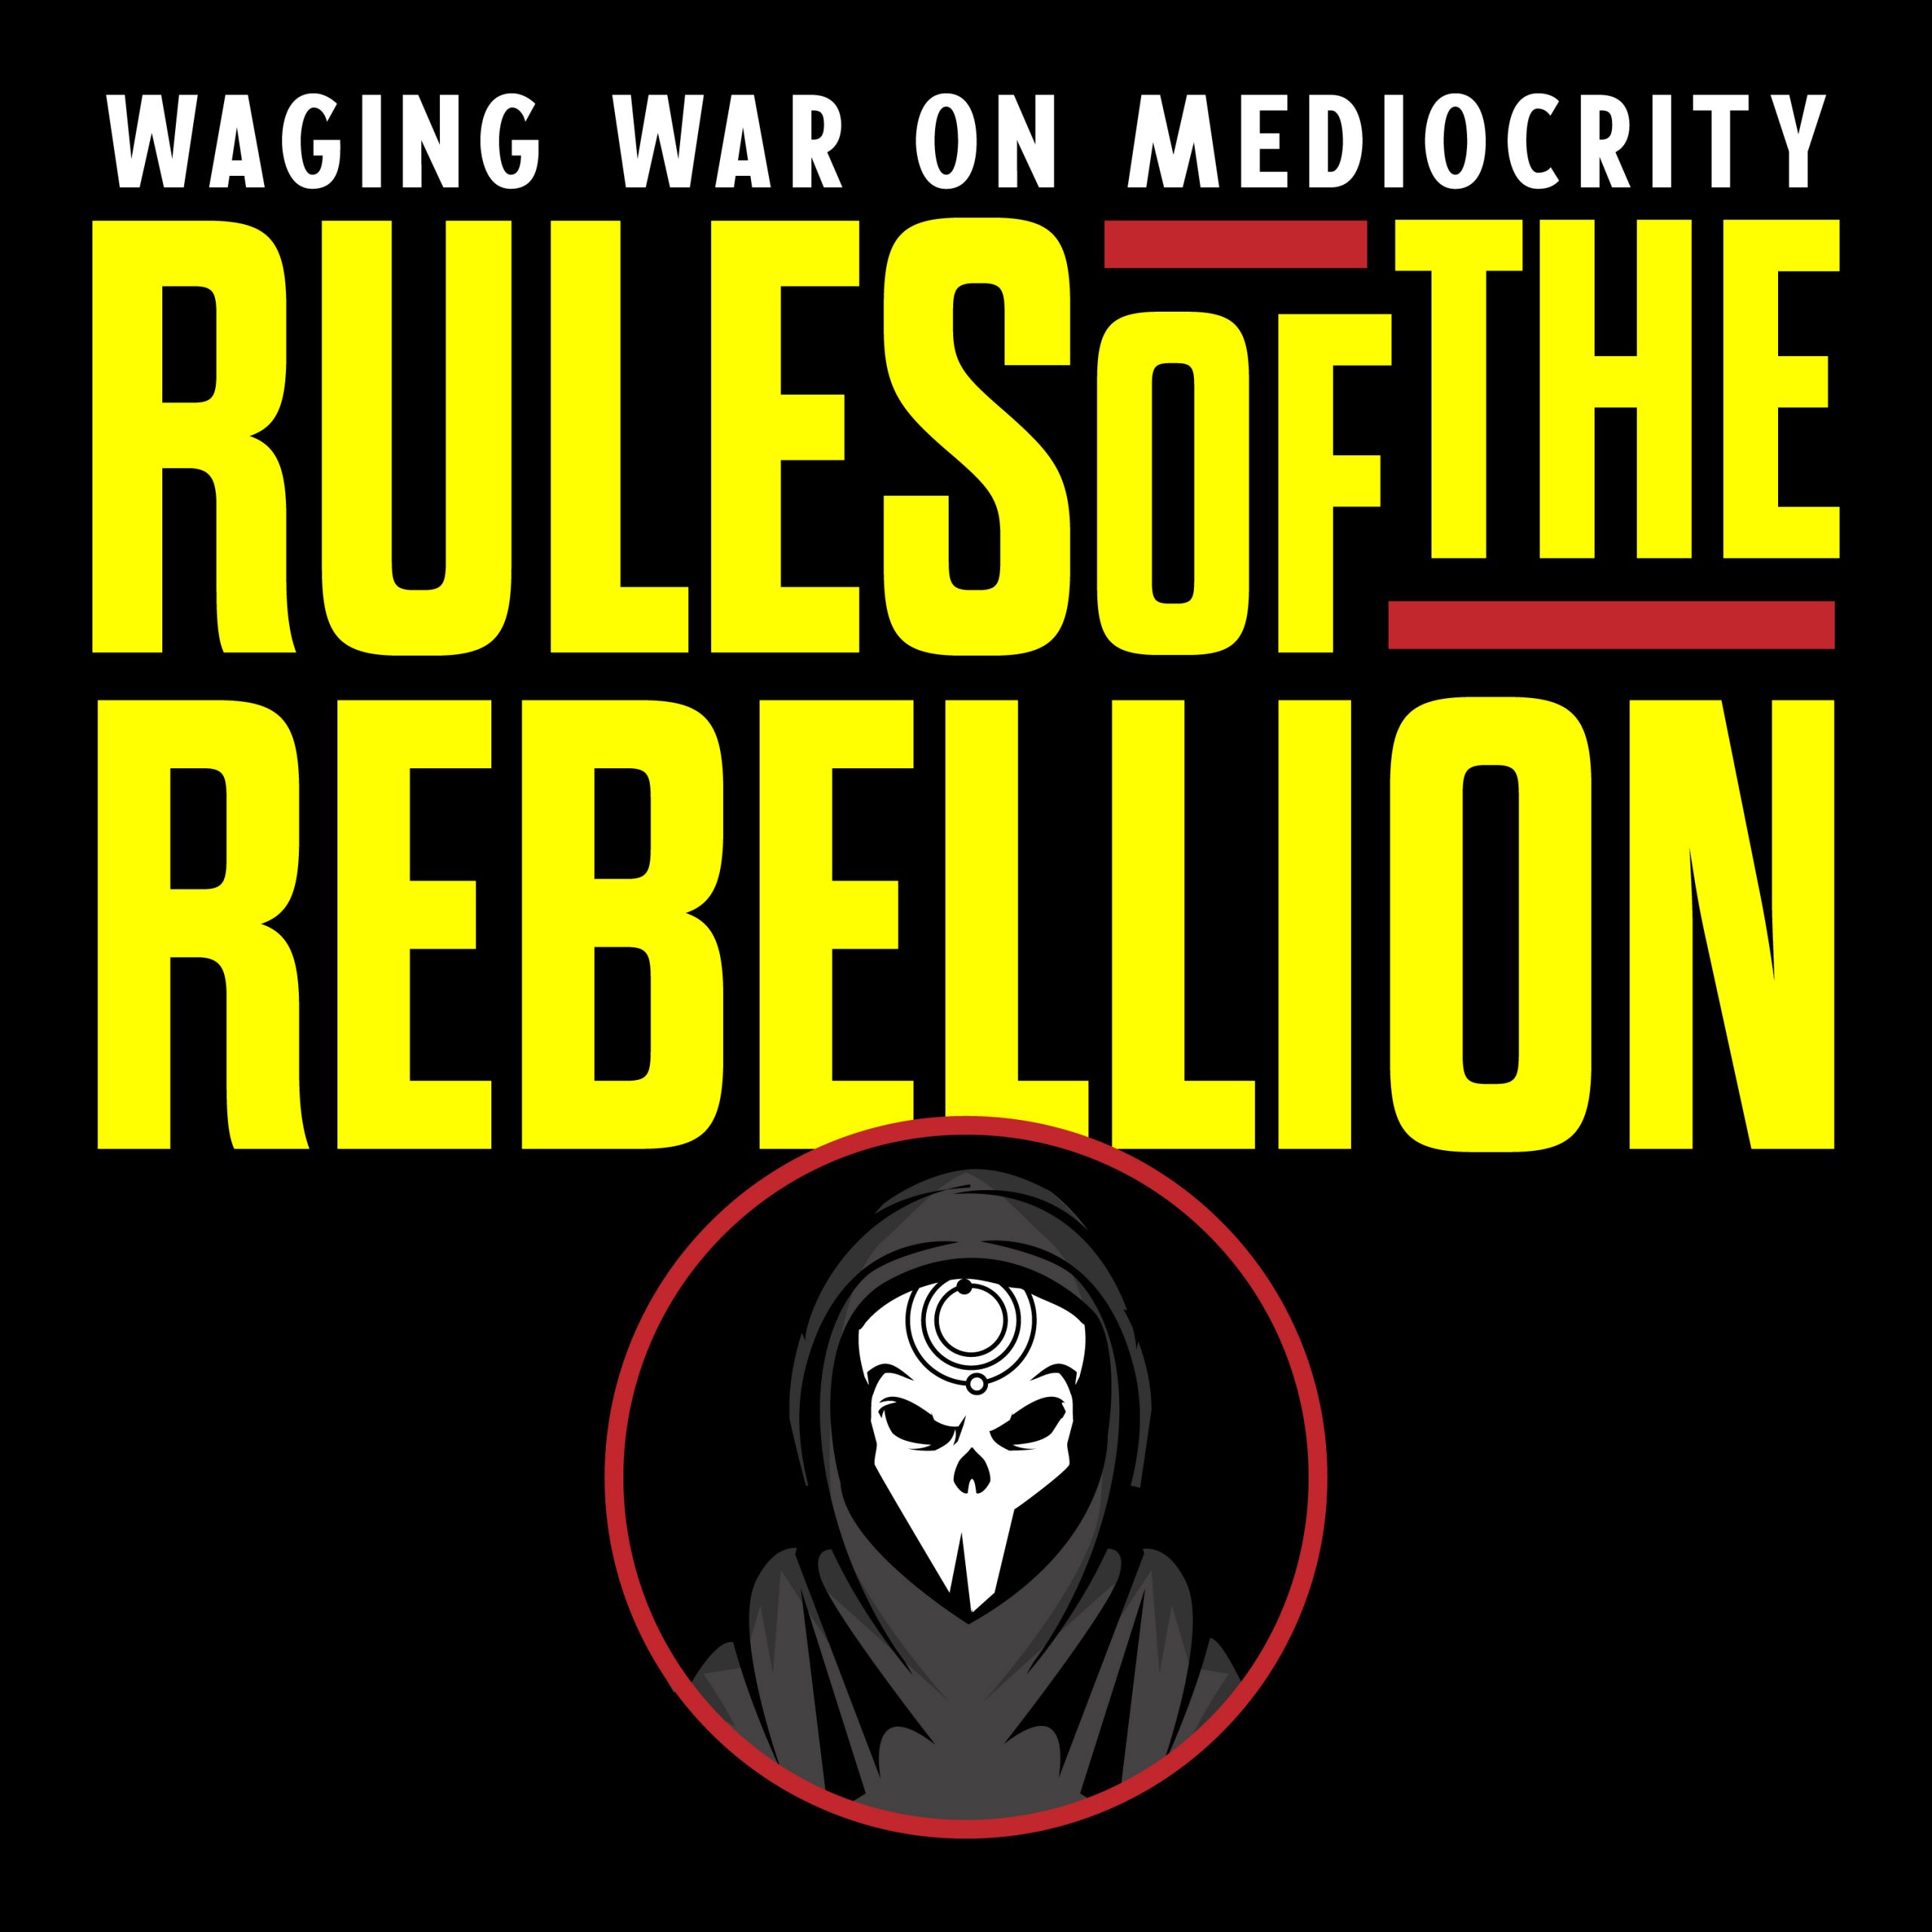 RULES OF THE REBELLION